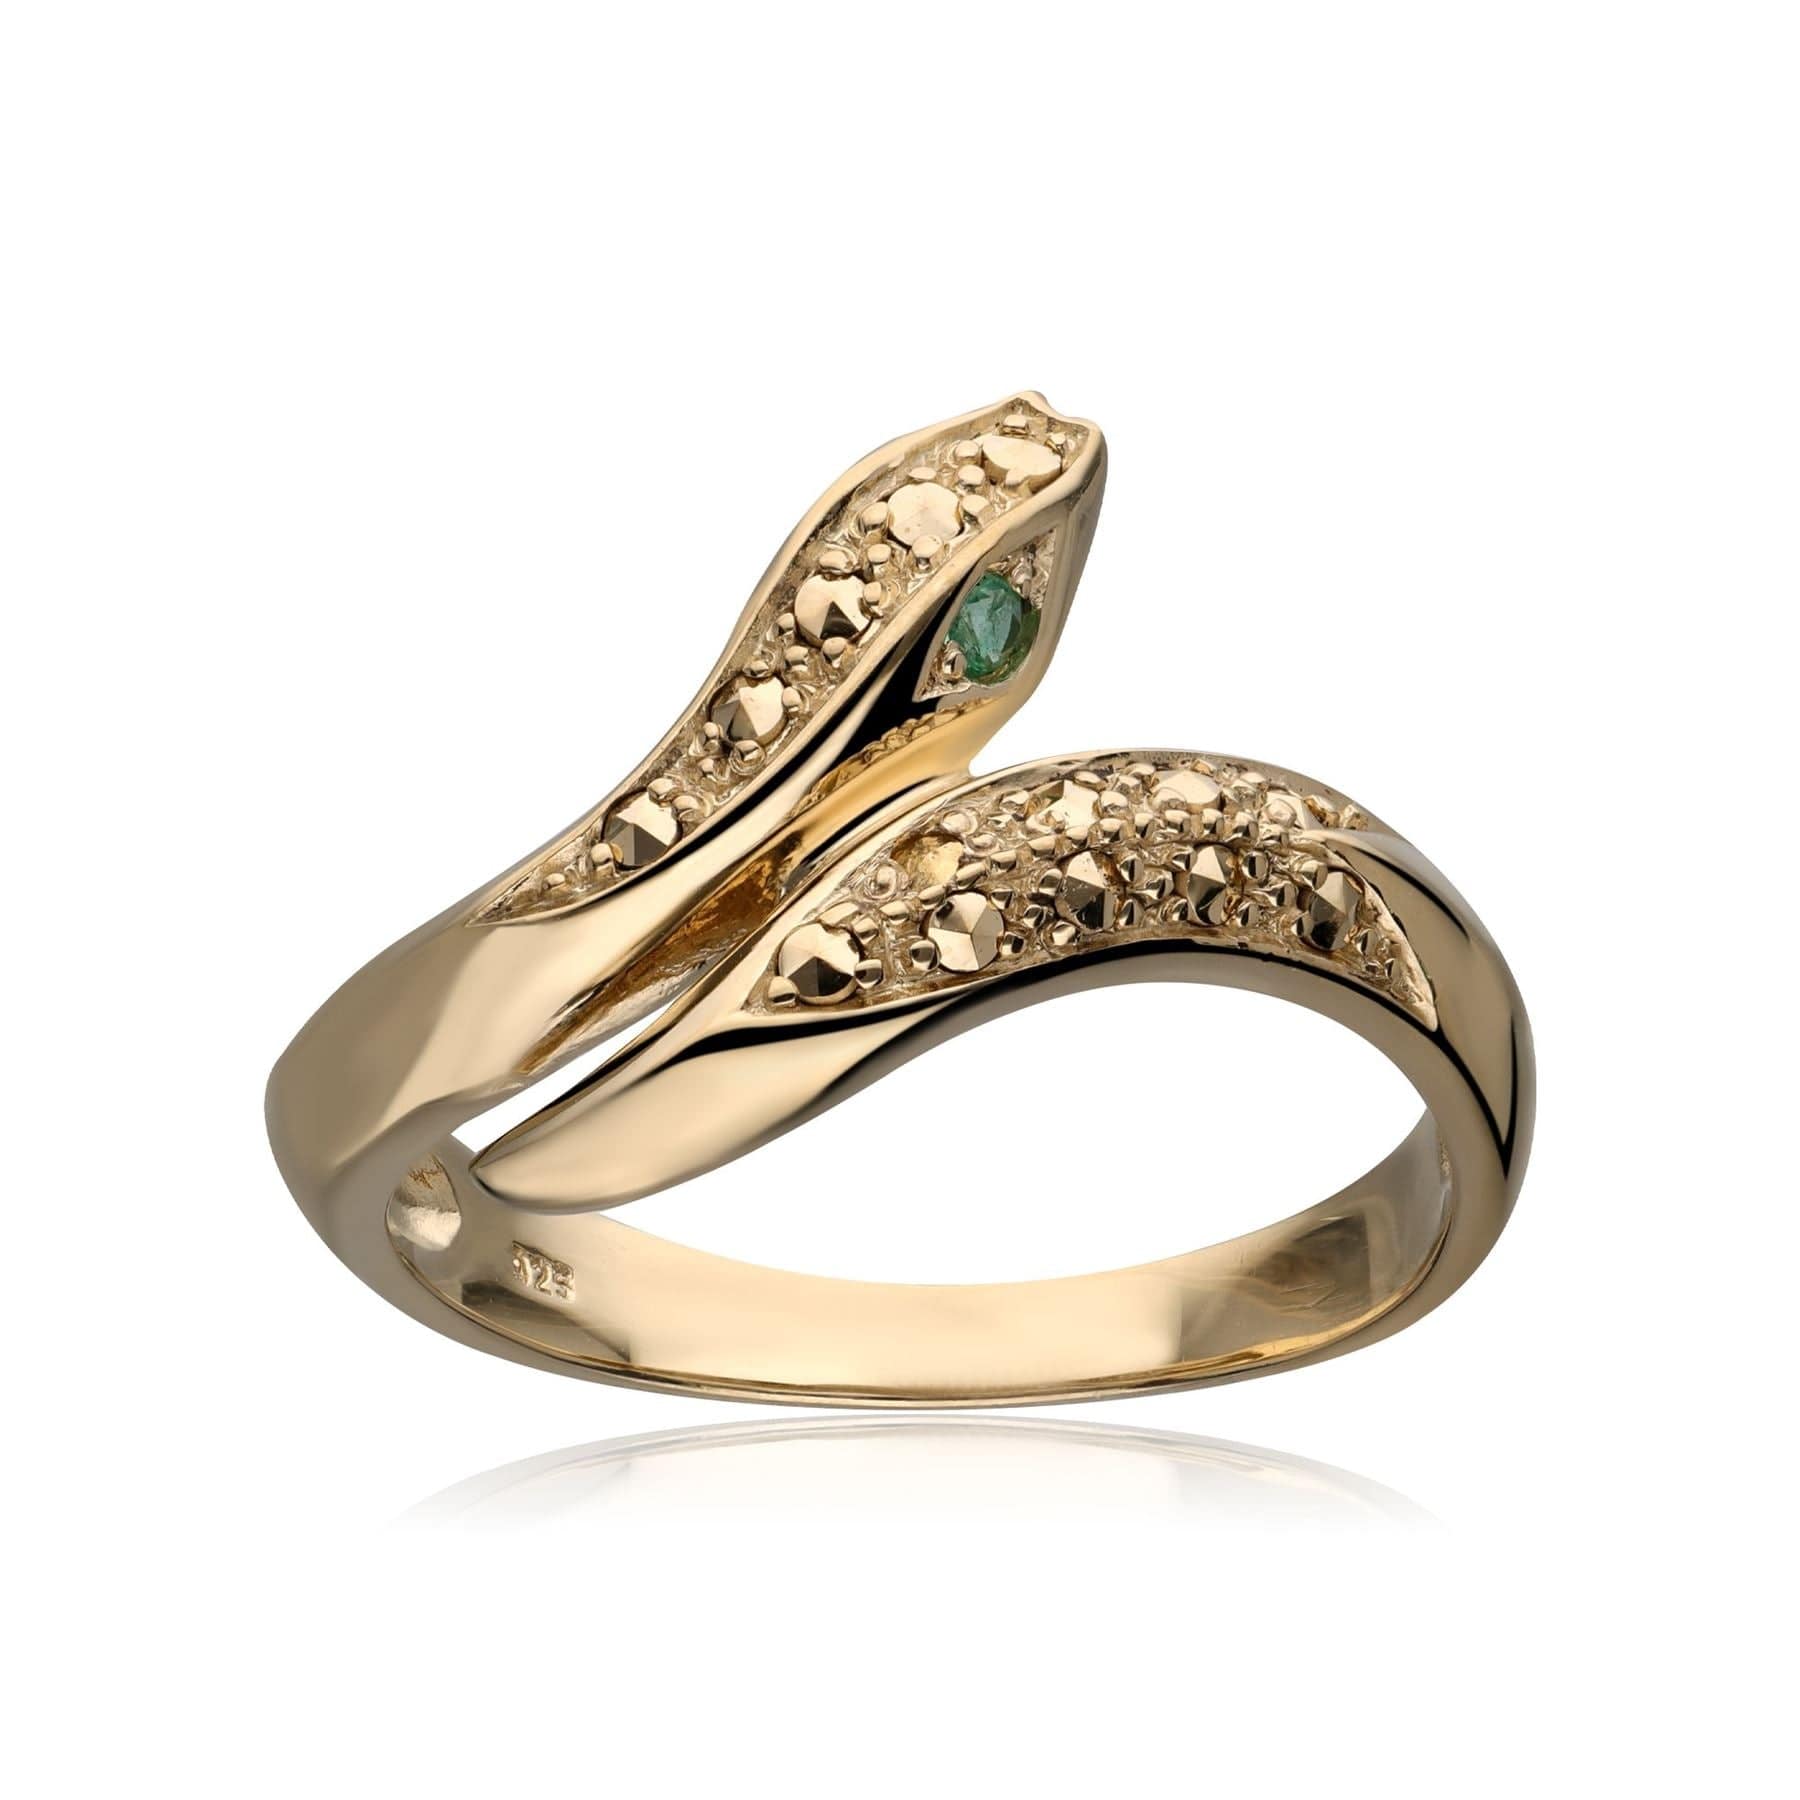 Emerald Eye Marcasite Snake Ring in Gold Plated Sterling Silver - Gemondo